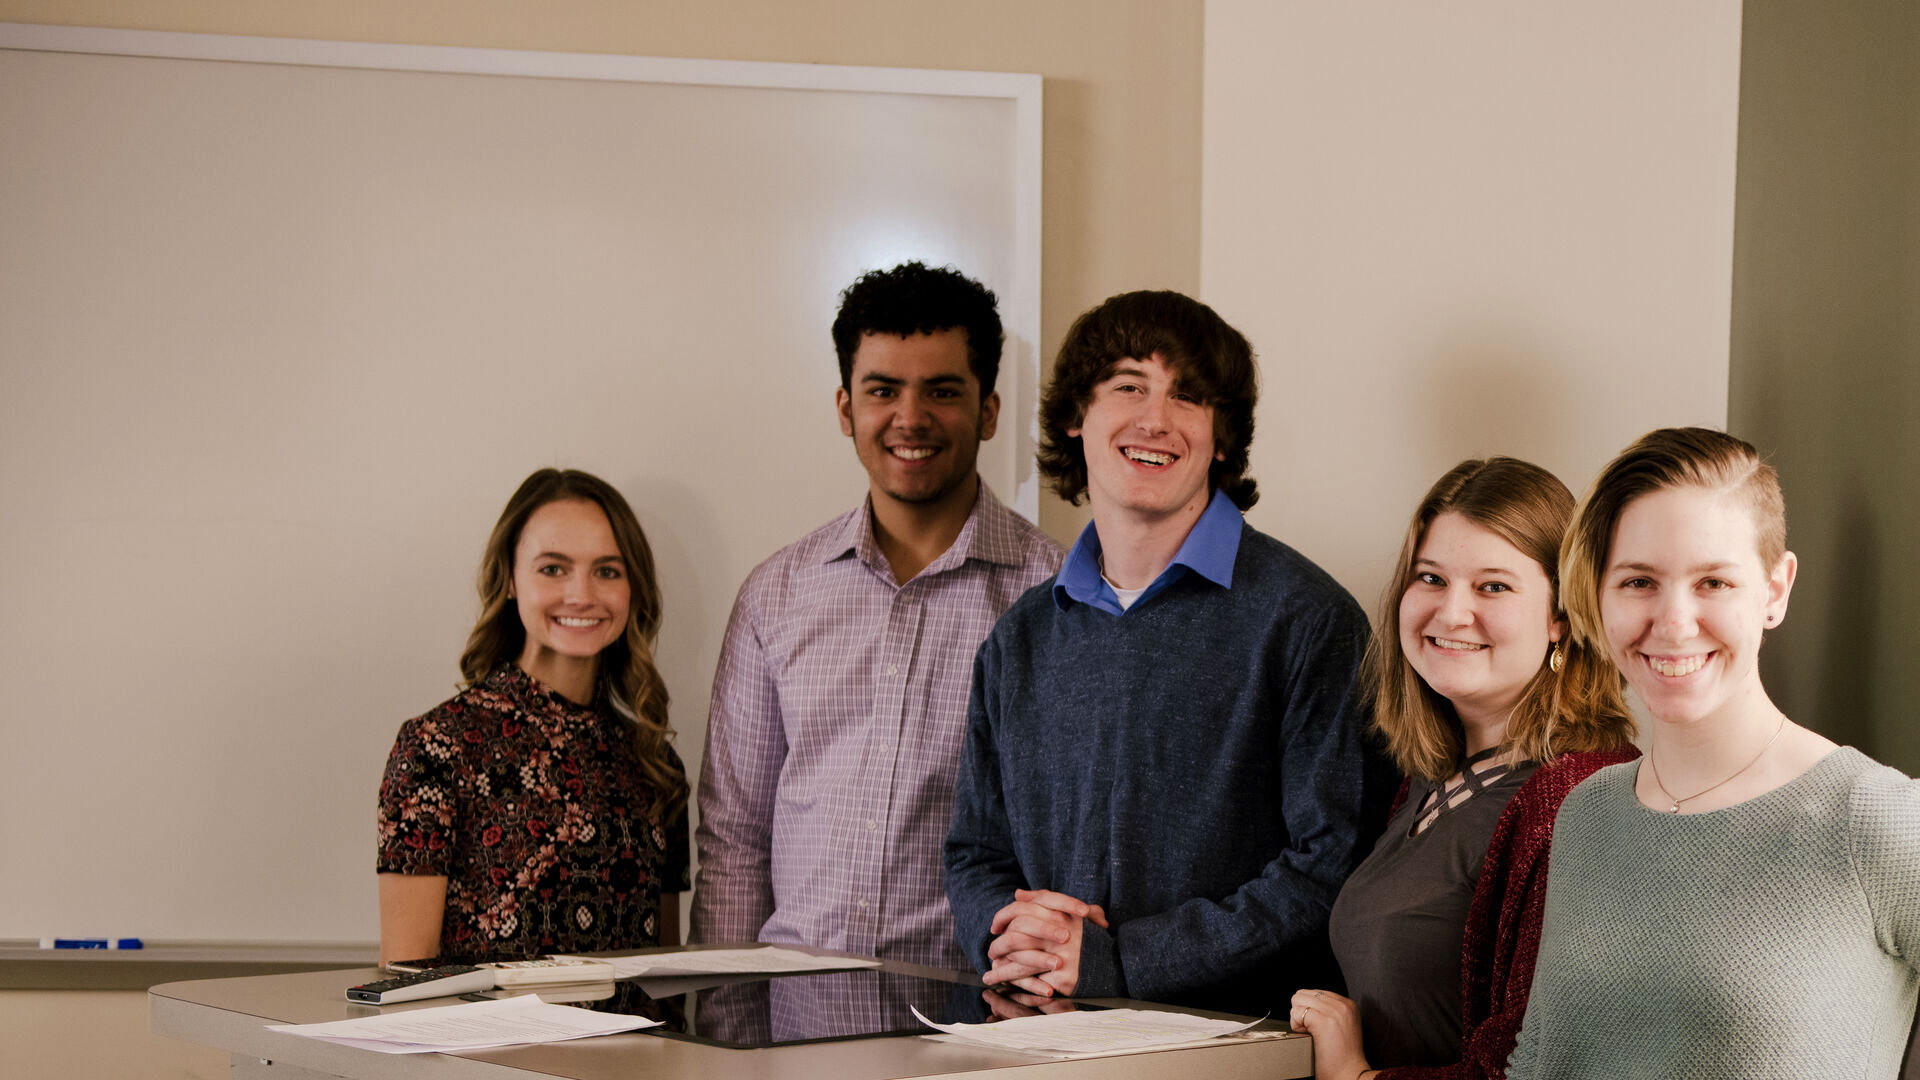 Five Houghton University business students standing and presenting at the front of class.